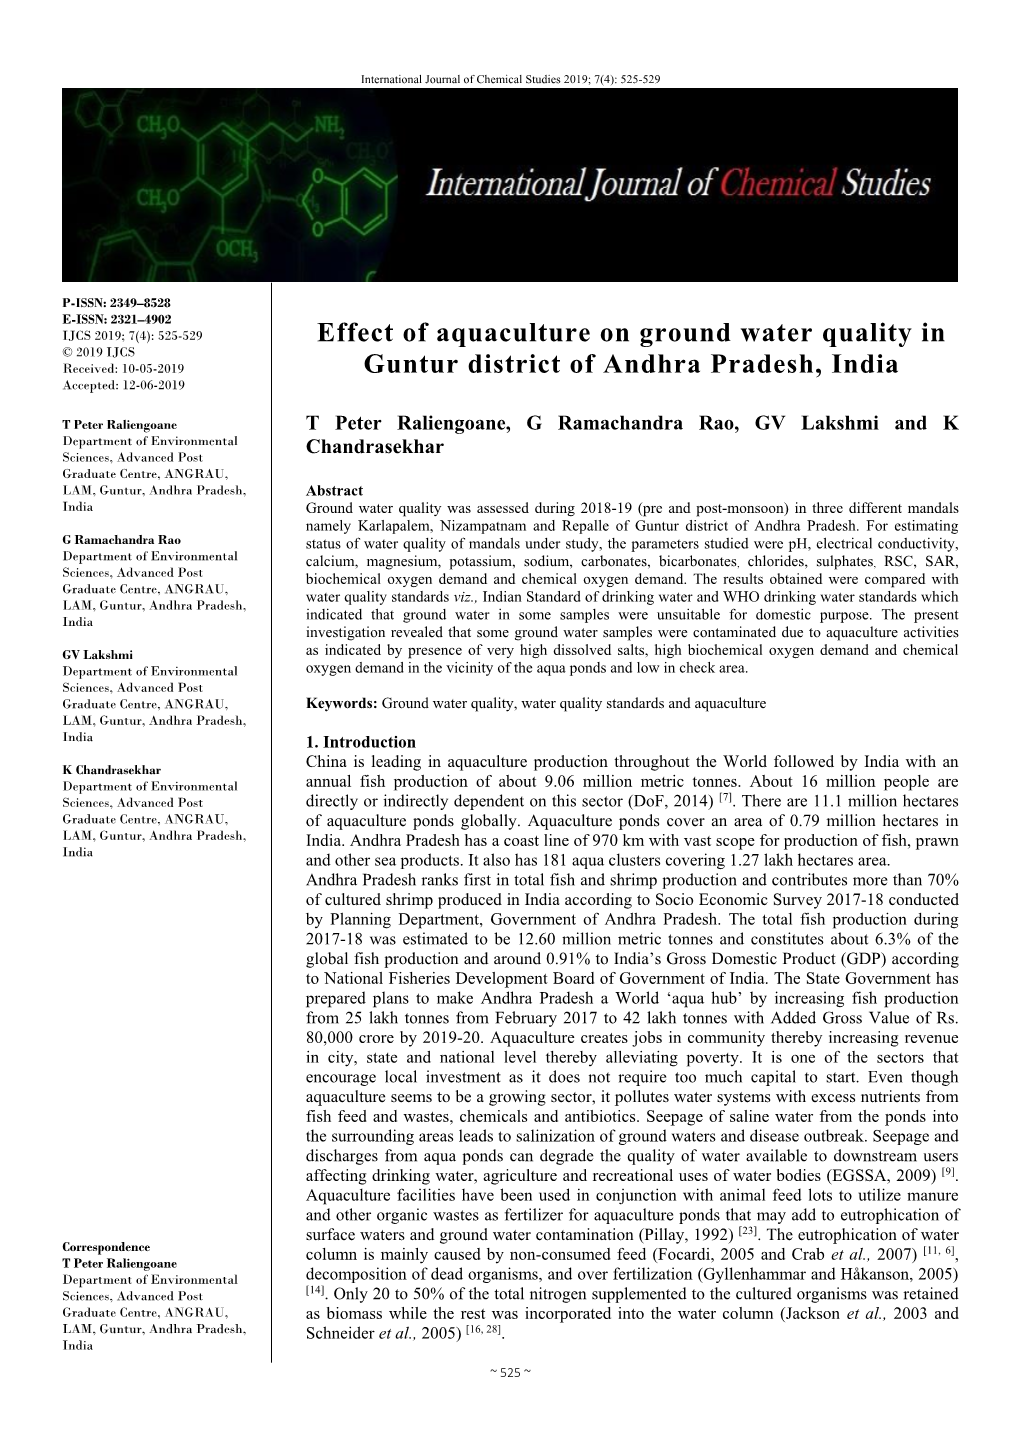 Effect of Aquaculture on Ground Water Quality in Guntur District of Andhra